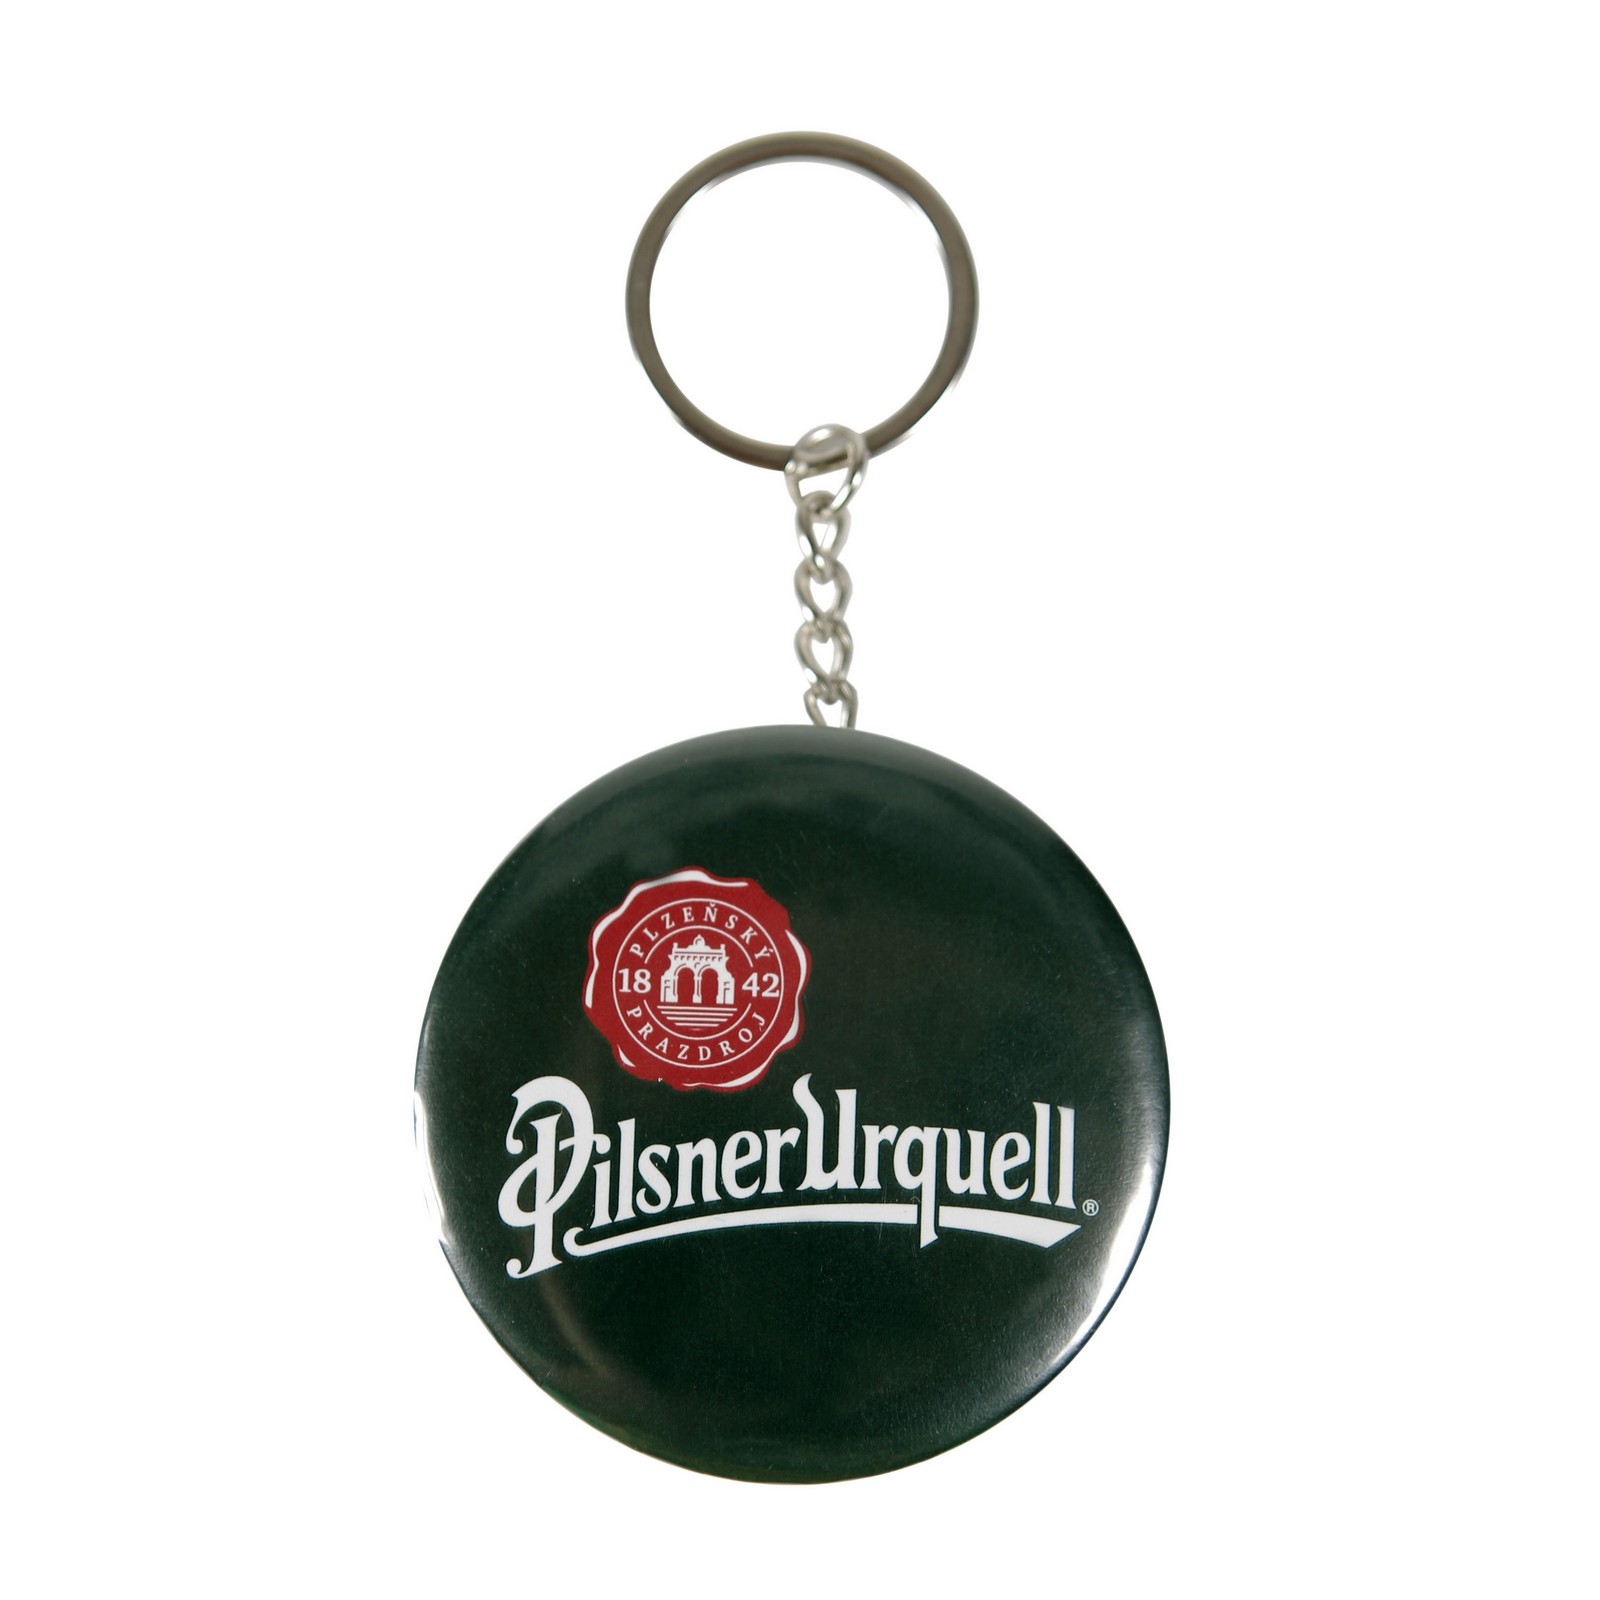 Bottle opener with a fob and Pilsner Urquell seal